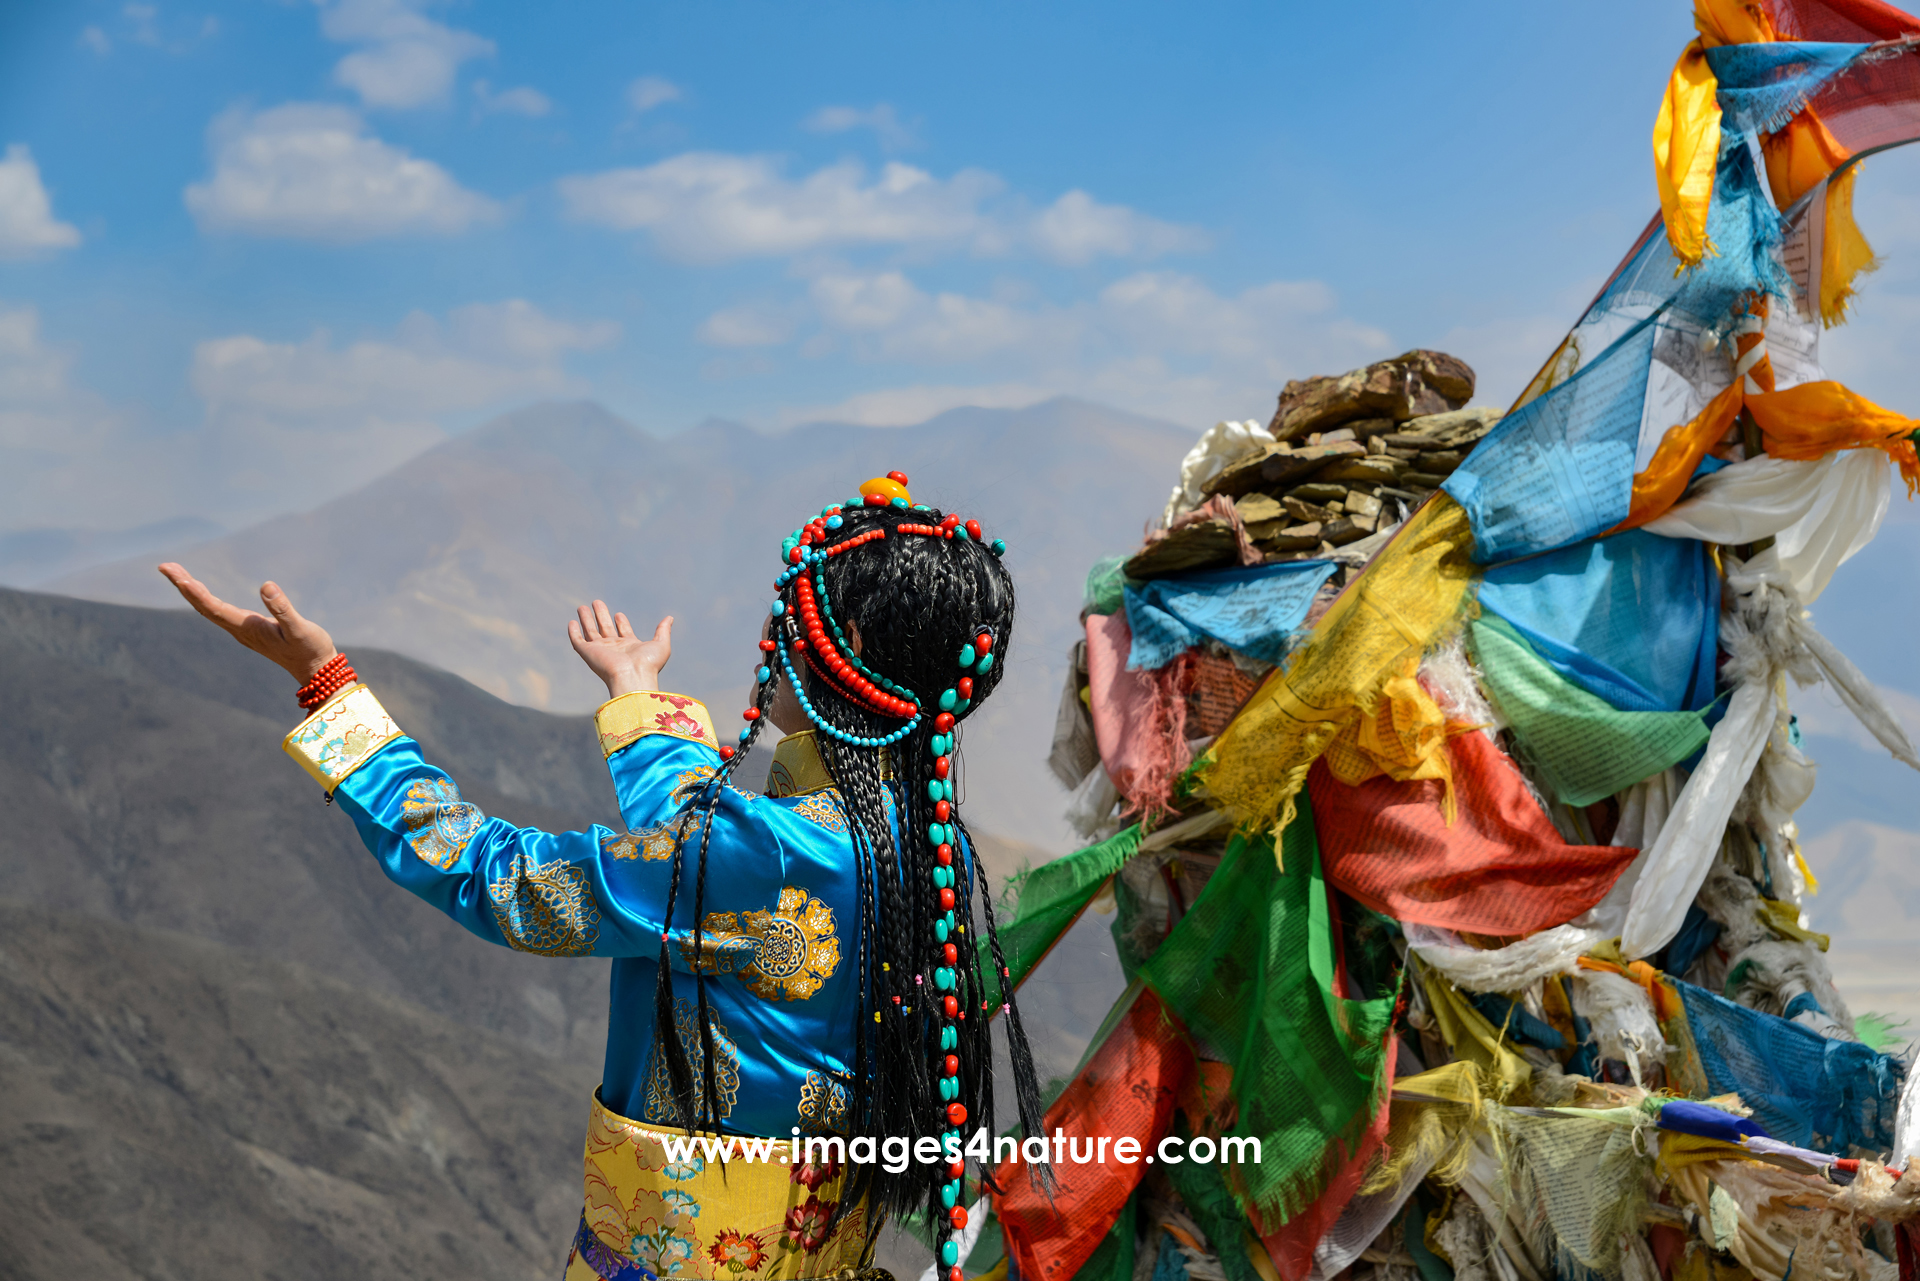 Rear side view of a Tibetan woman performing a prayer against mountain landscape with colorful flags